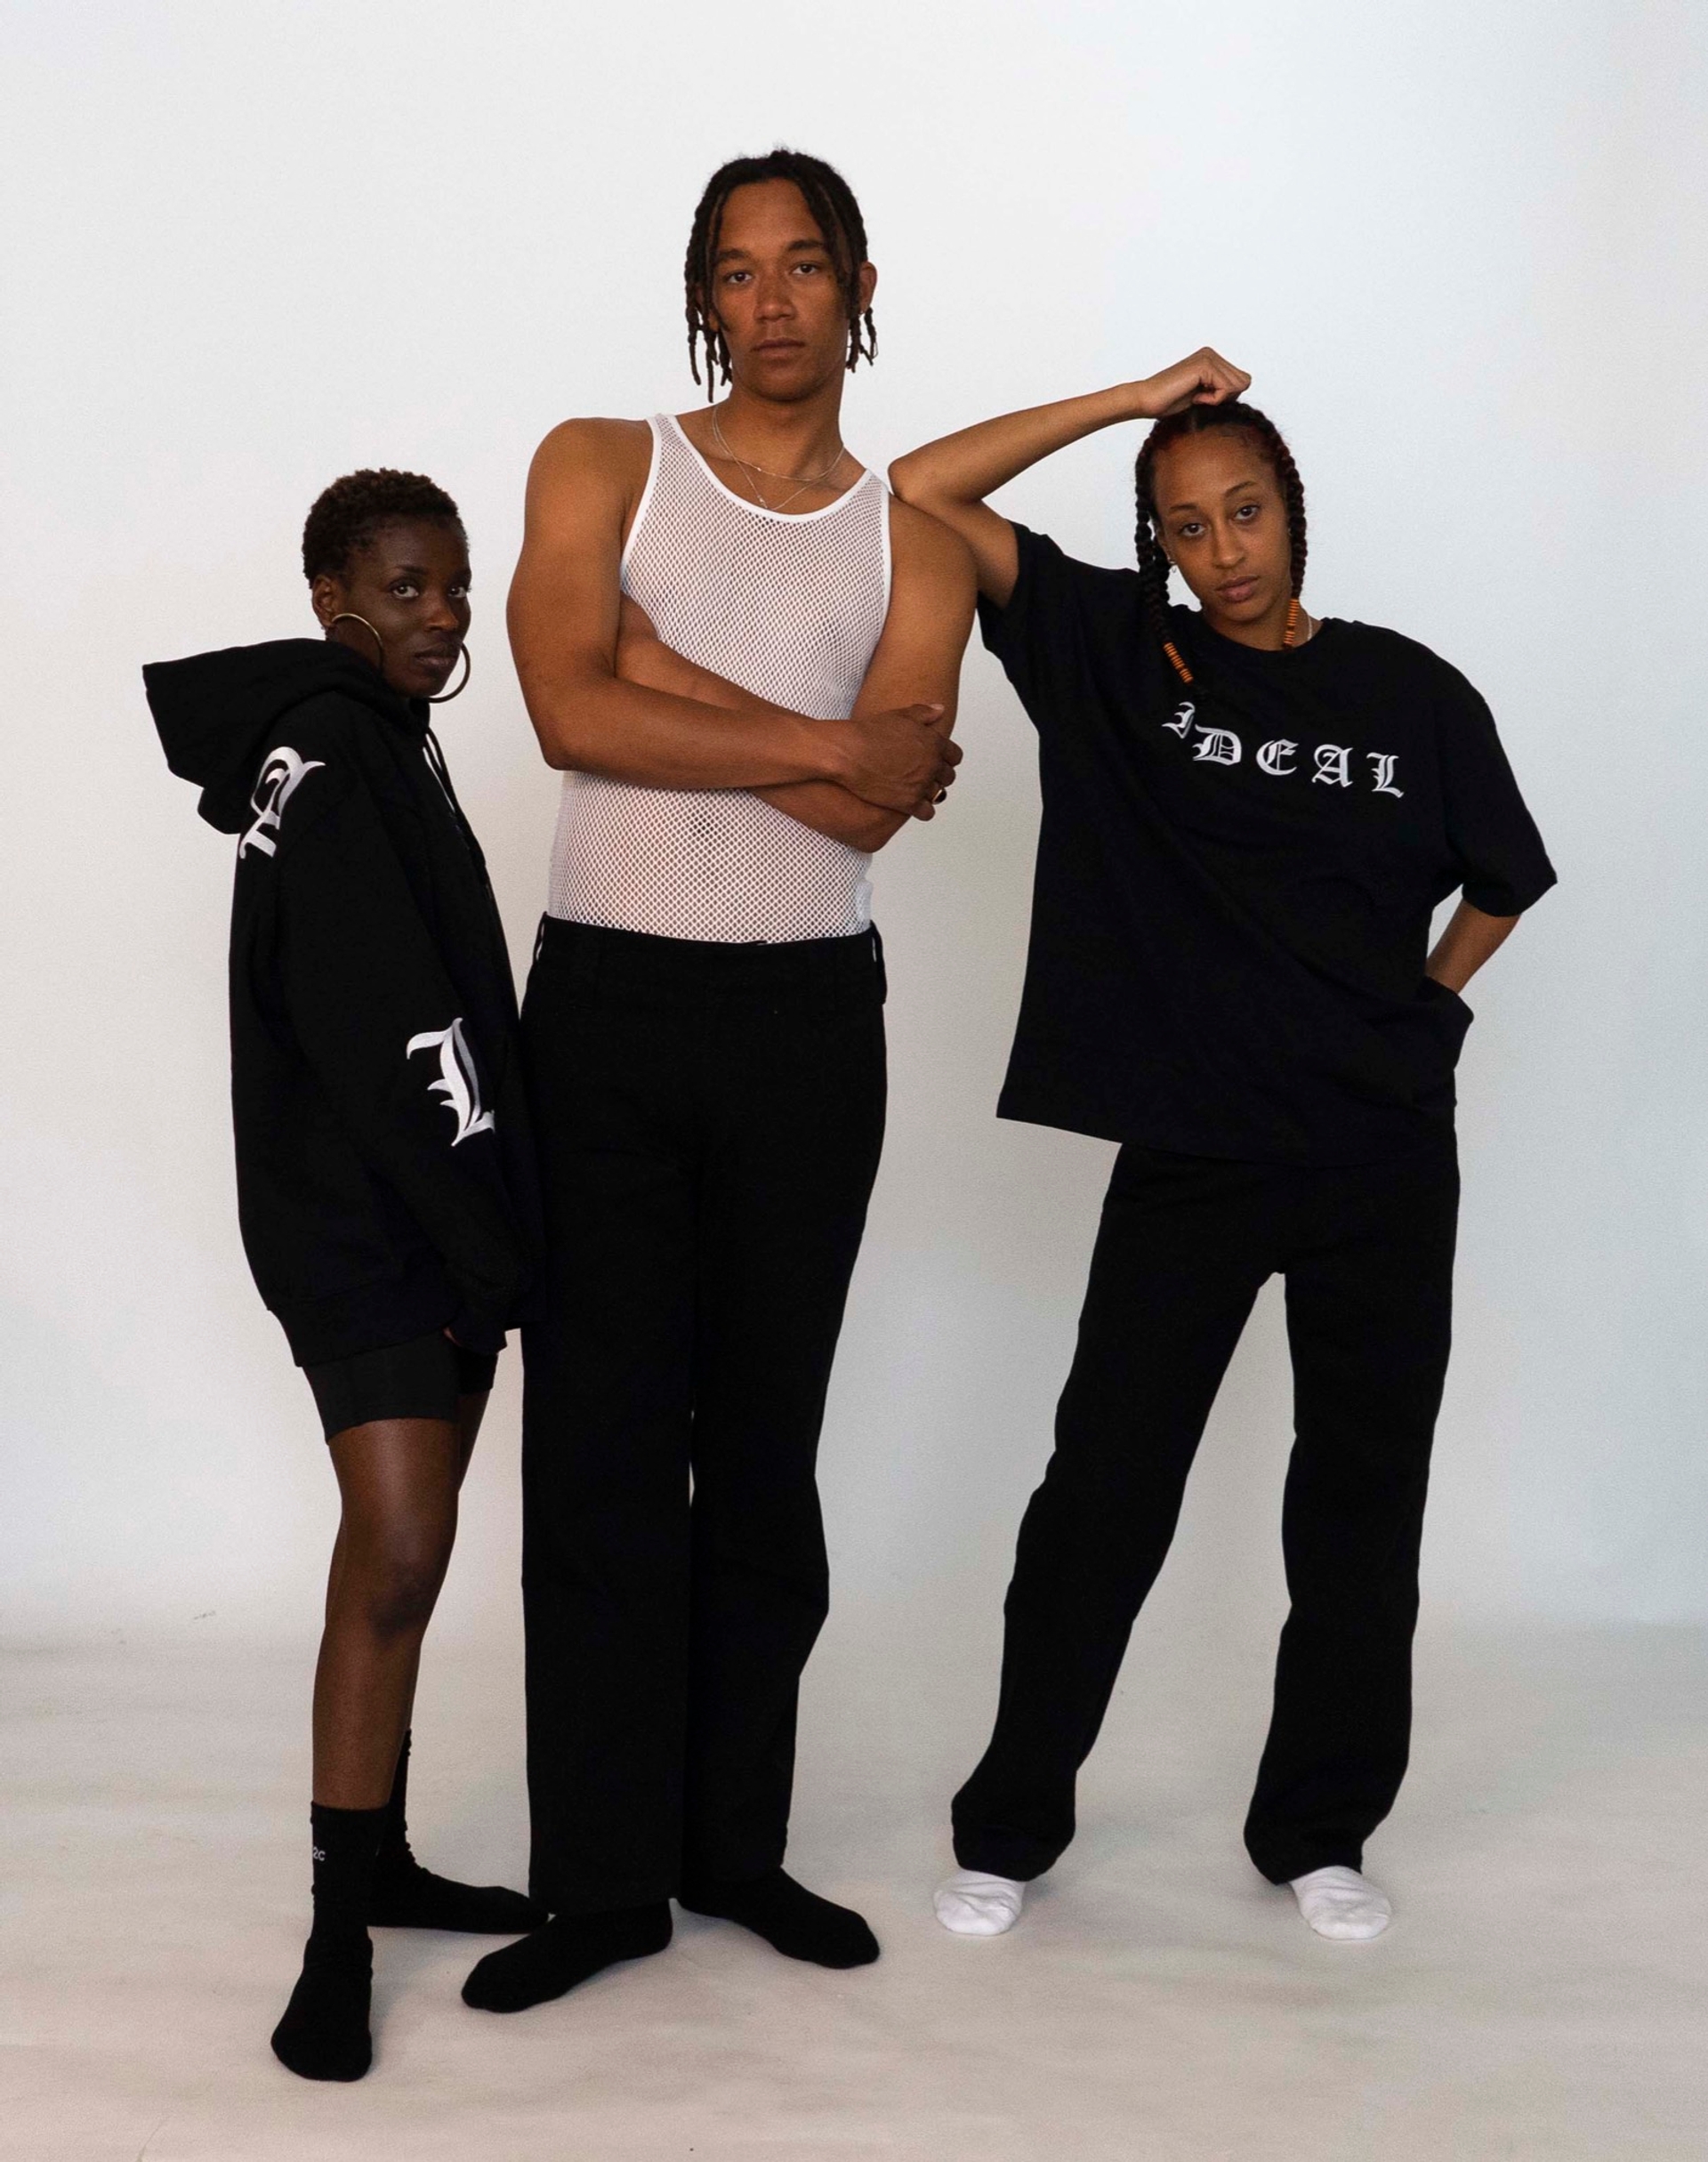 Mariama wears the 032c LoveSexDreams "Team Société"/"IDEAL" Hoodie in black, with neoprene shorts in black. Buyegi wears the Net Tank in white with straight leg trousers. Libell wears the "Ideal" t-shirt with straight leg trousers